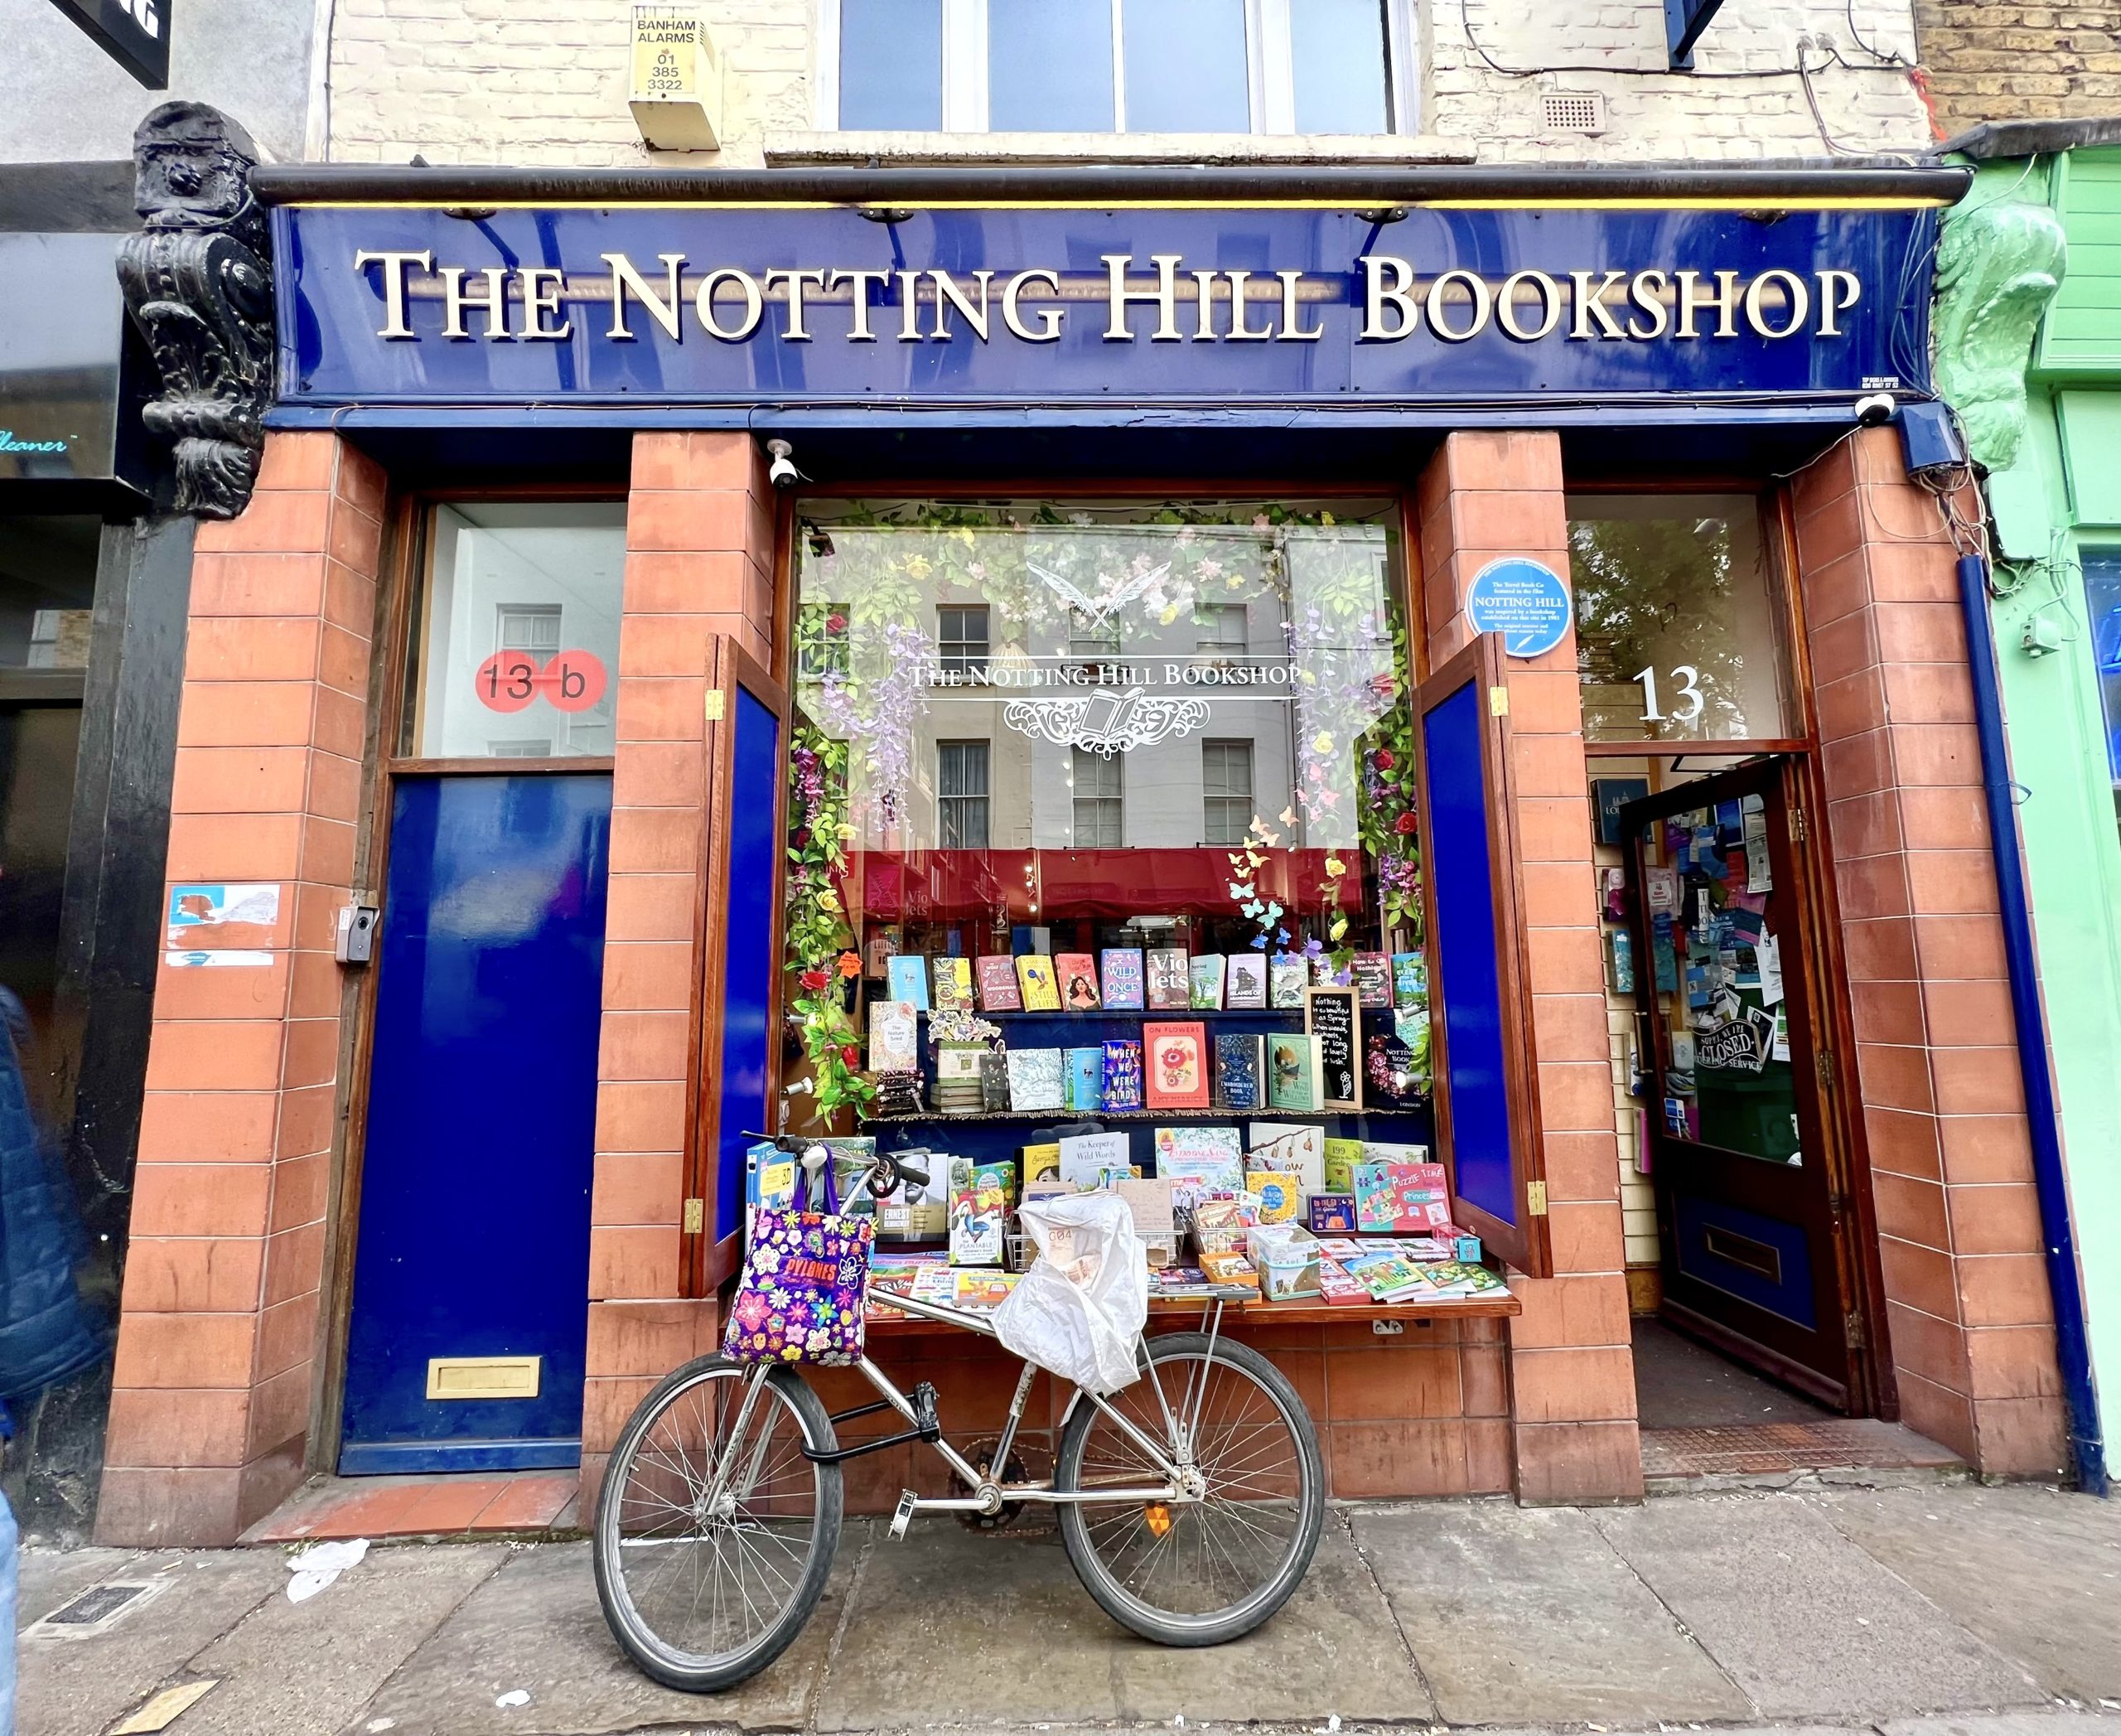 bookshop that inspired the Notting Hill movie